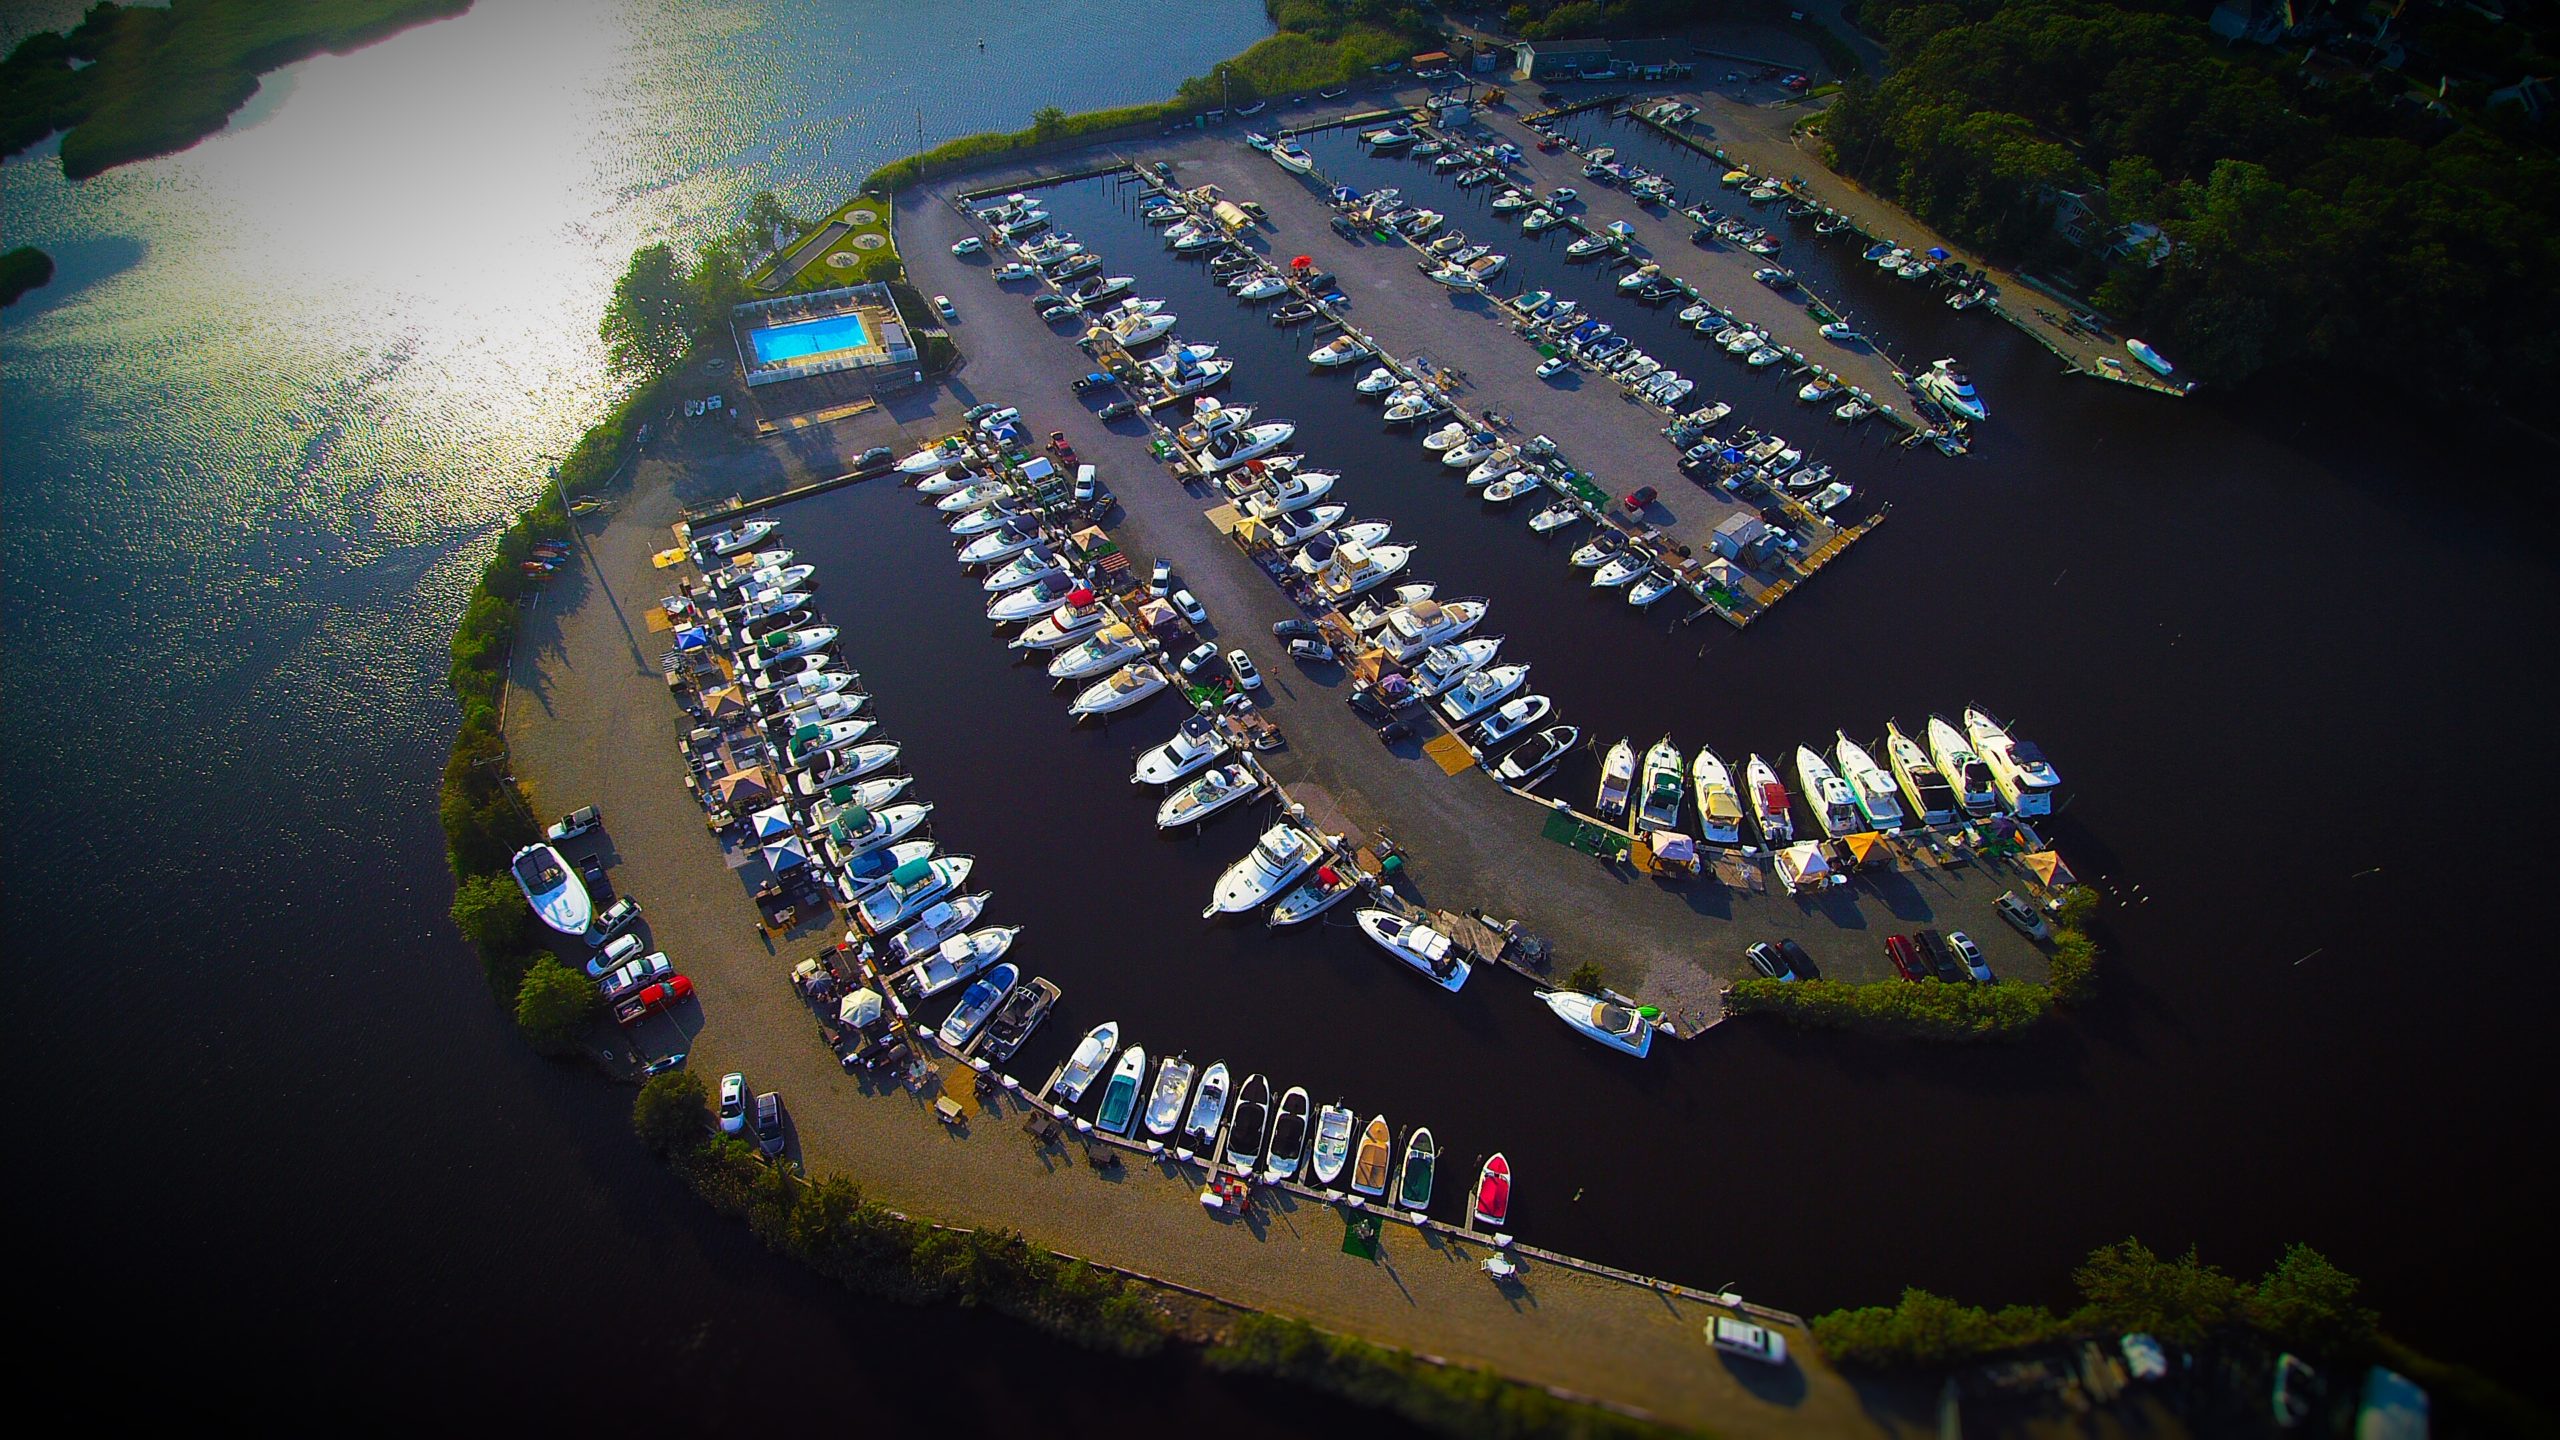 Green Cove Marina on the Jersey Shore in Brick, New Jersey as seen from above.